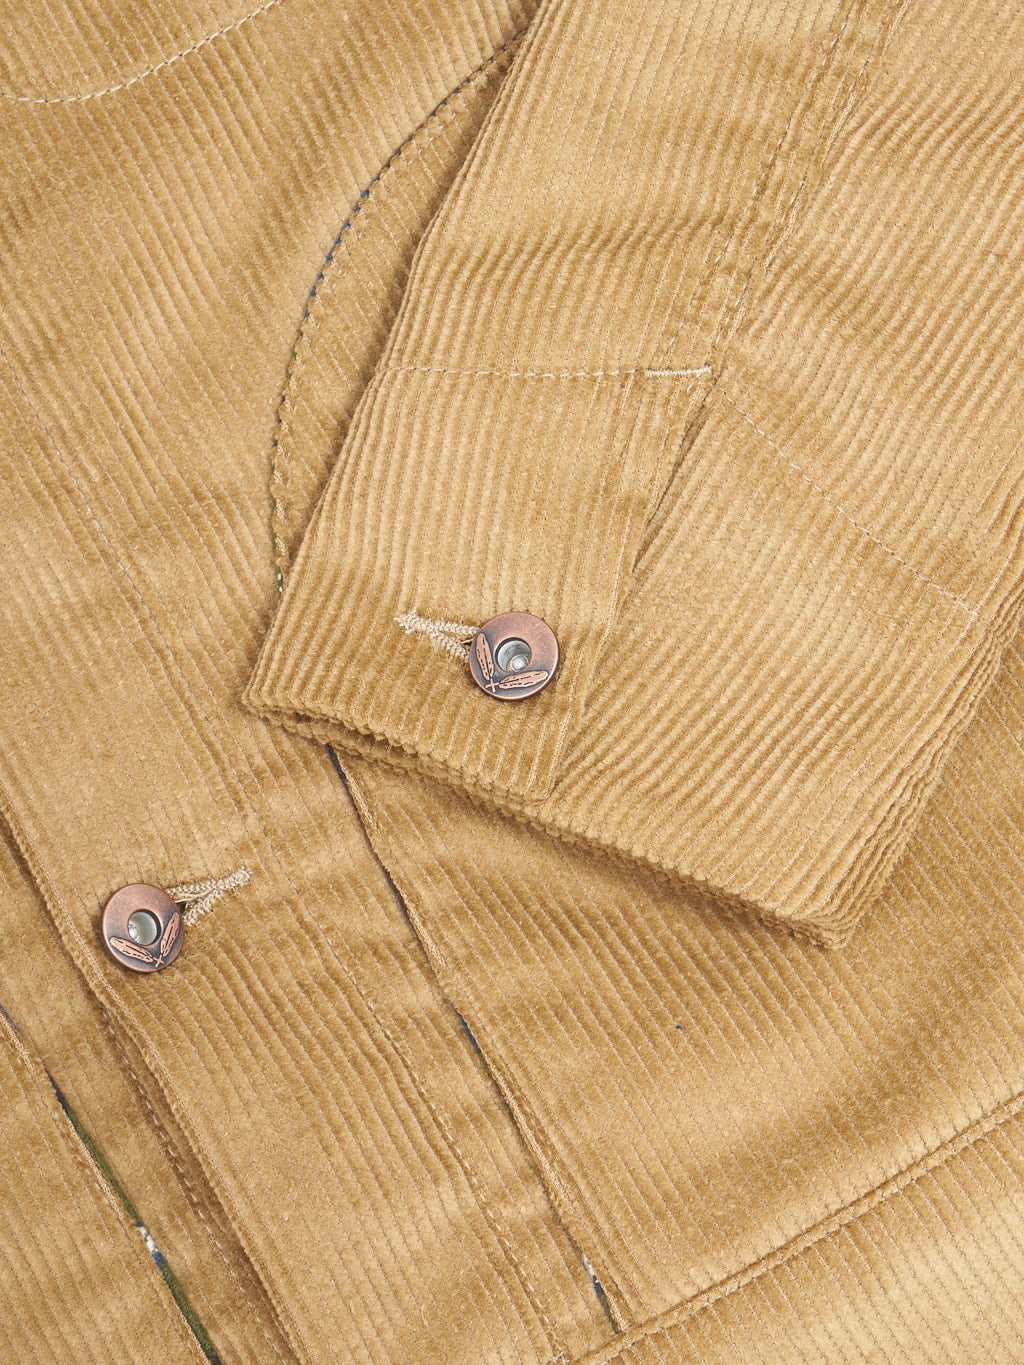 Rogue Territory Supply Jacket Lined Tan Corduroy cuff